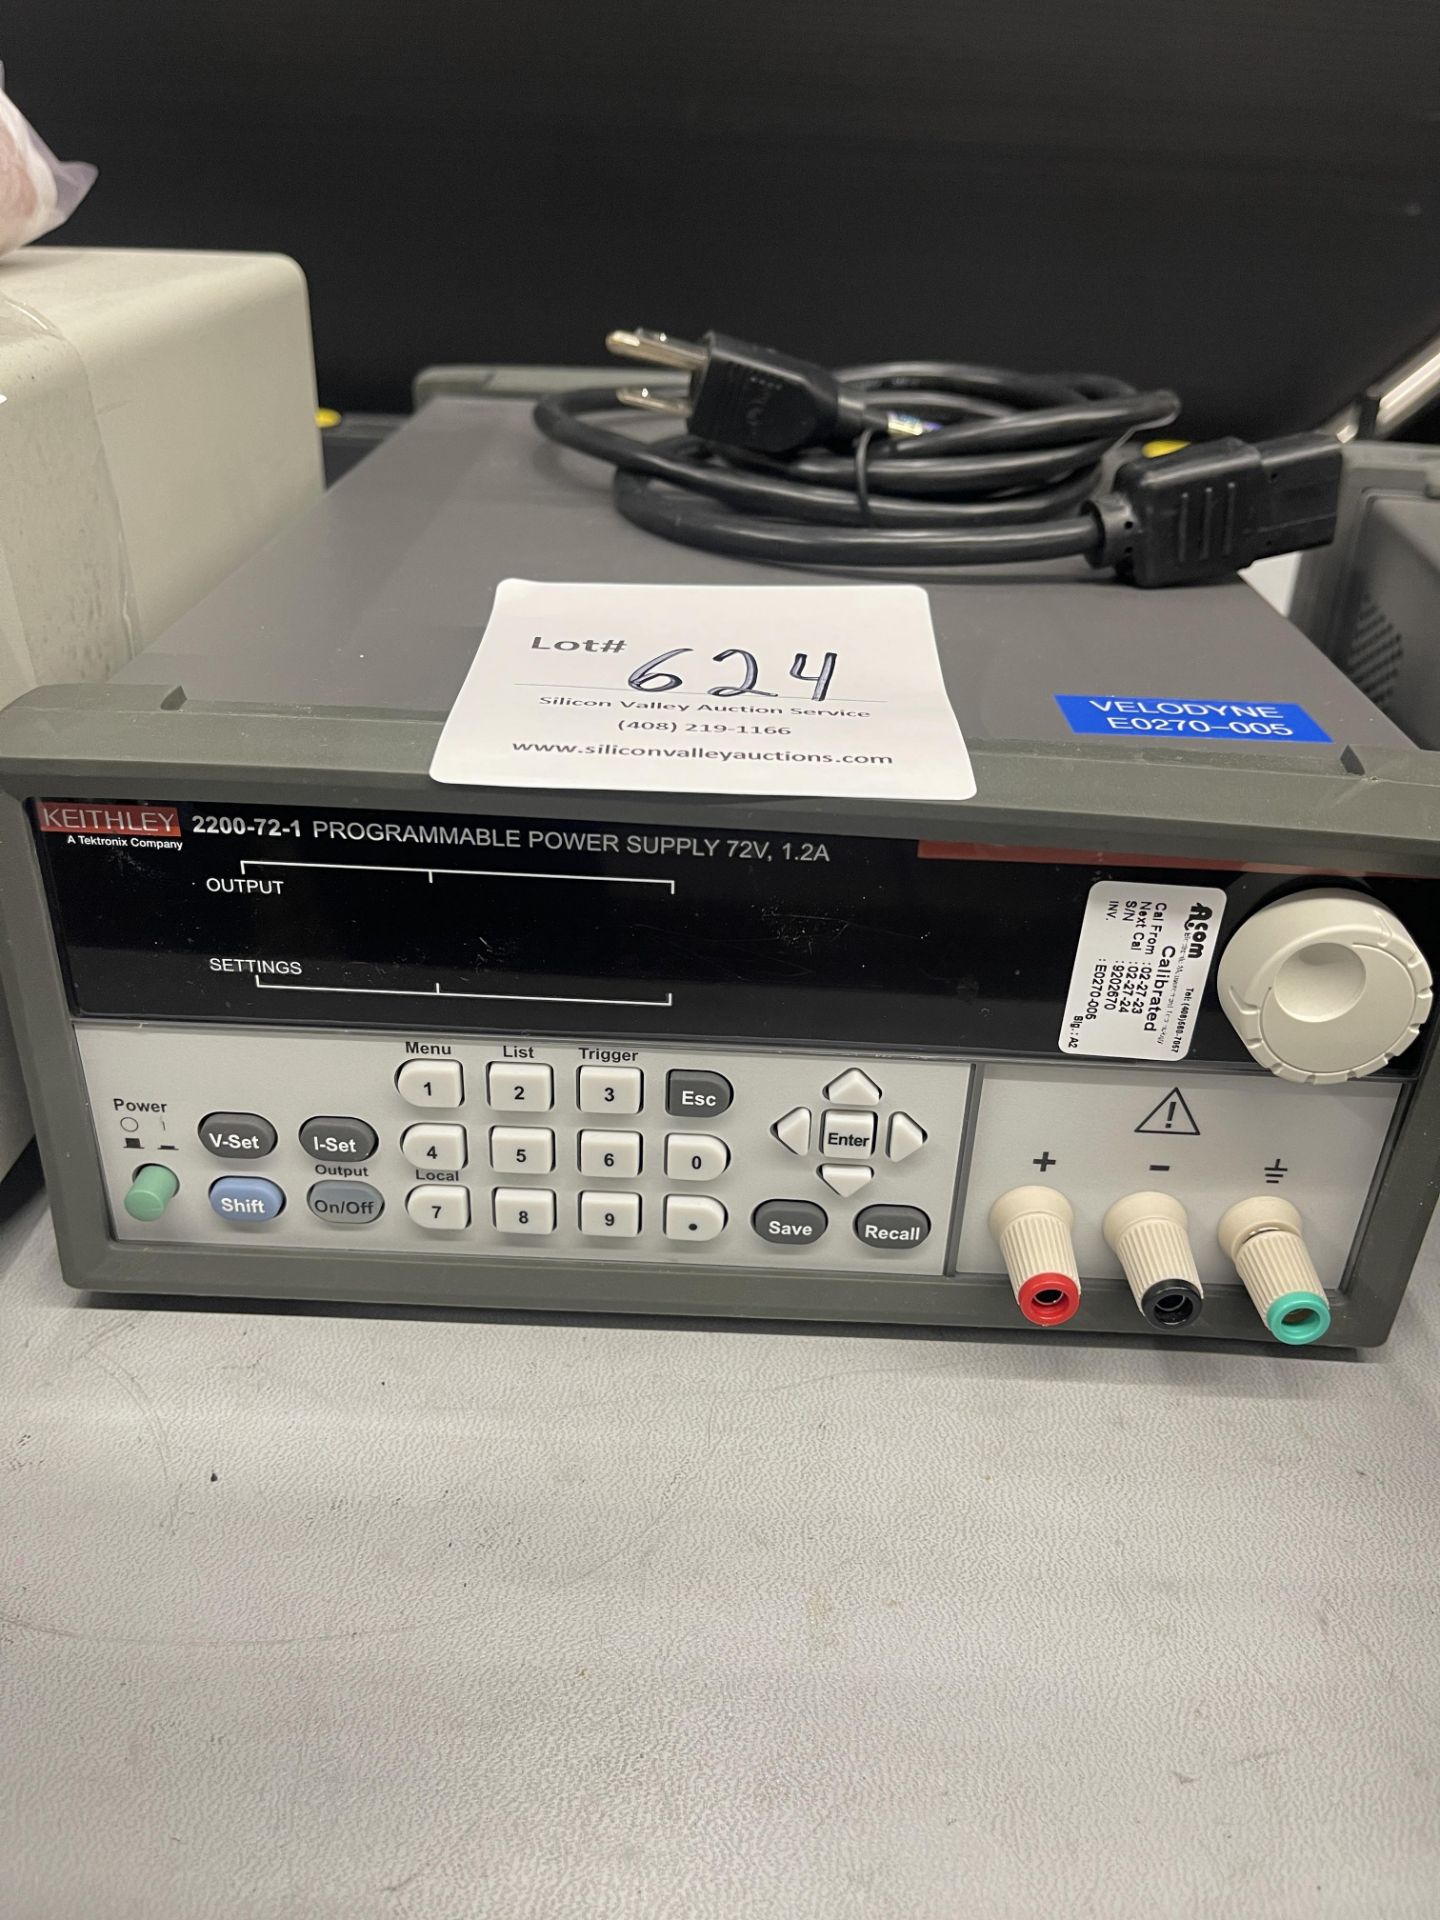 Keithley 2200-72-1 Programmable Power Supply 72V, 1.2A